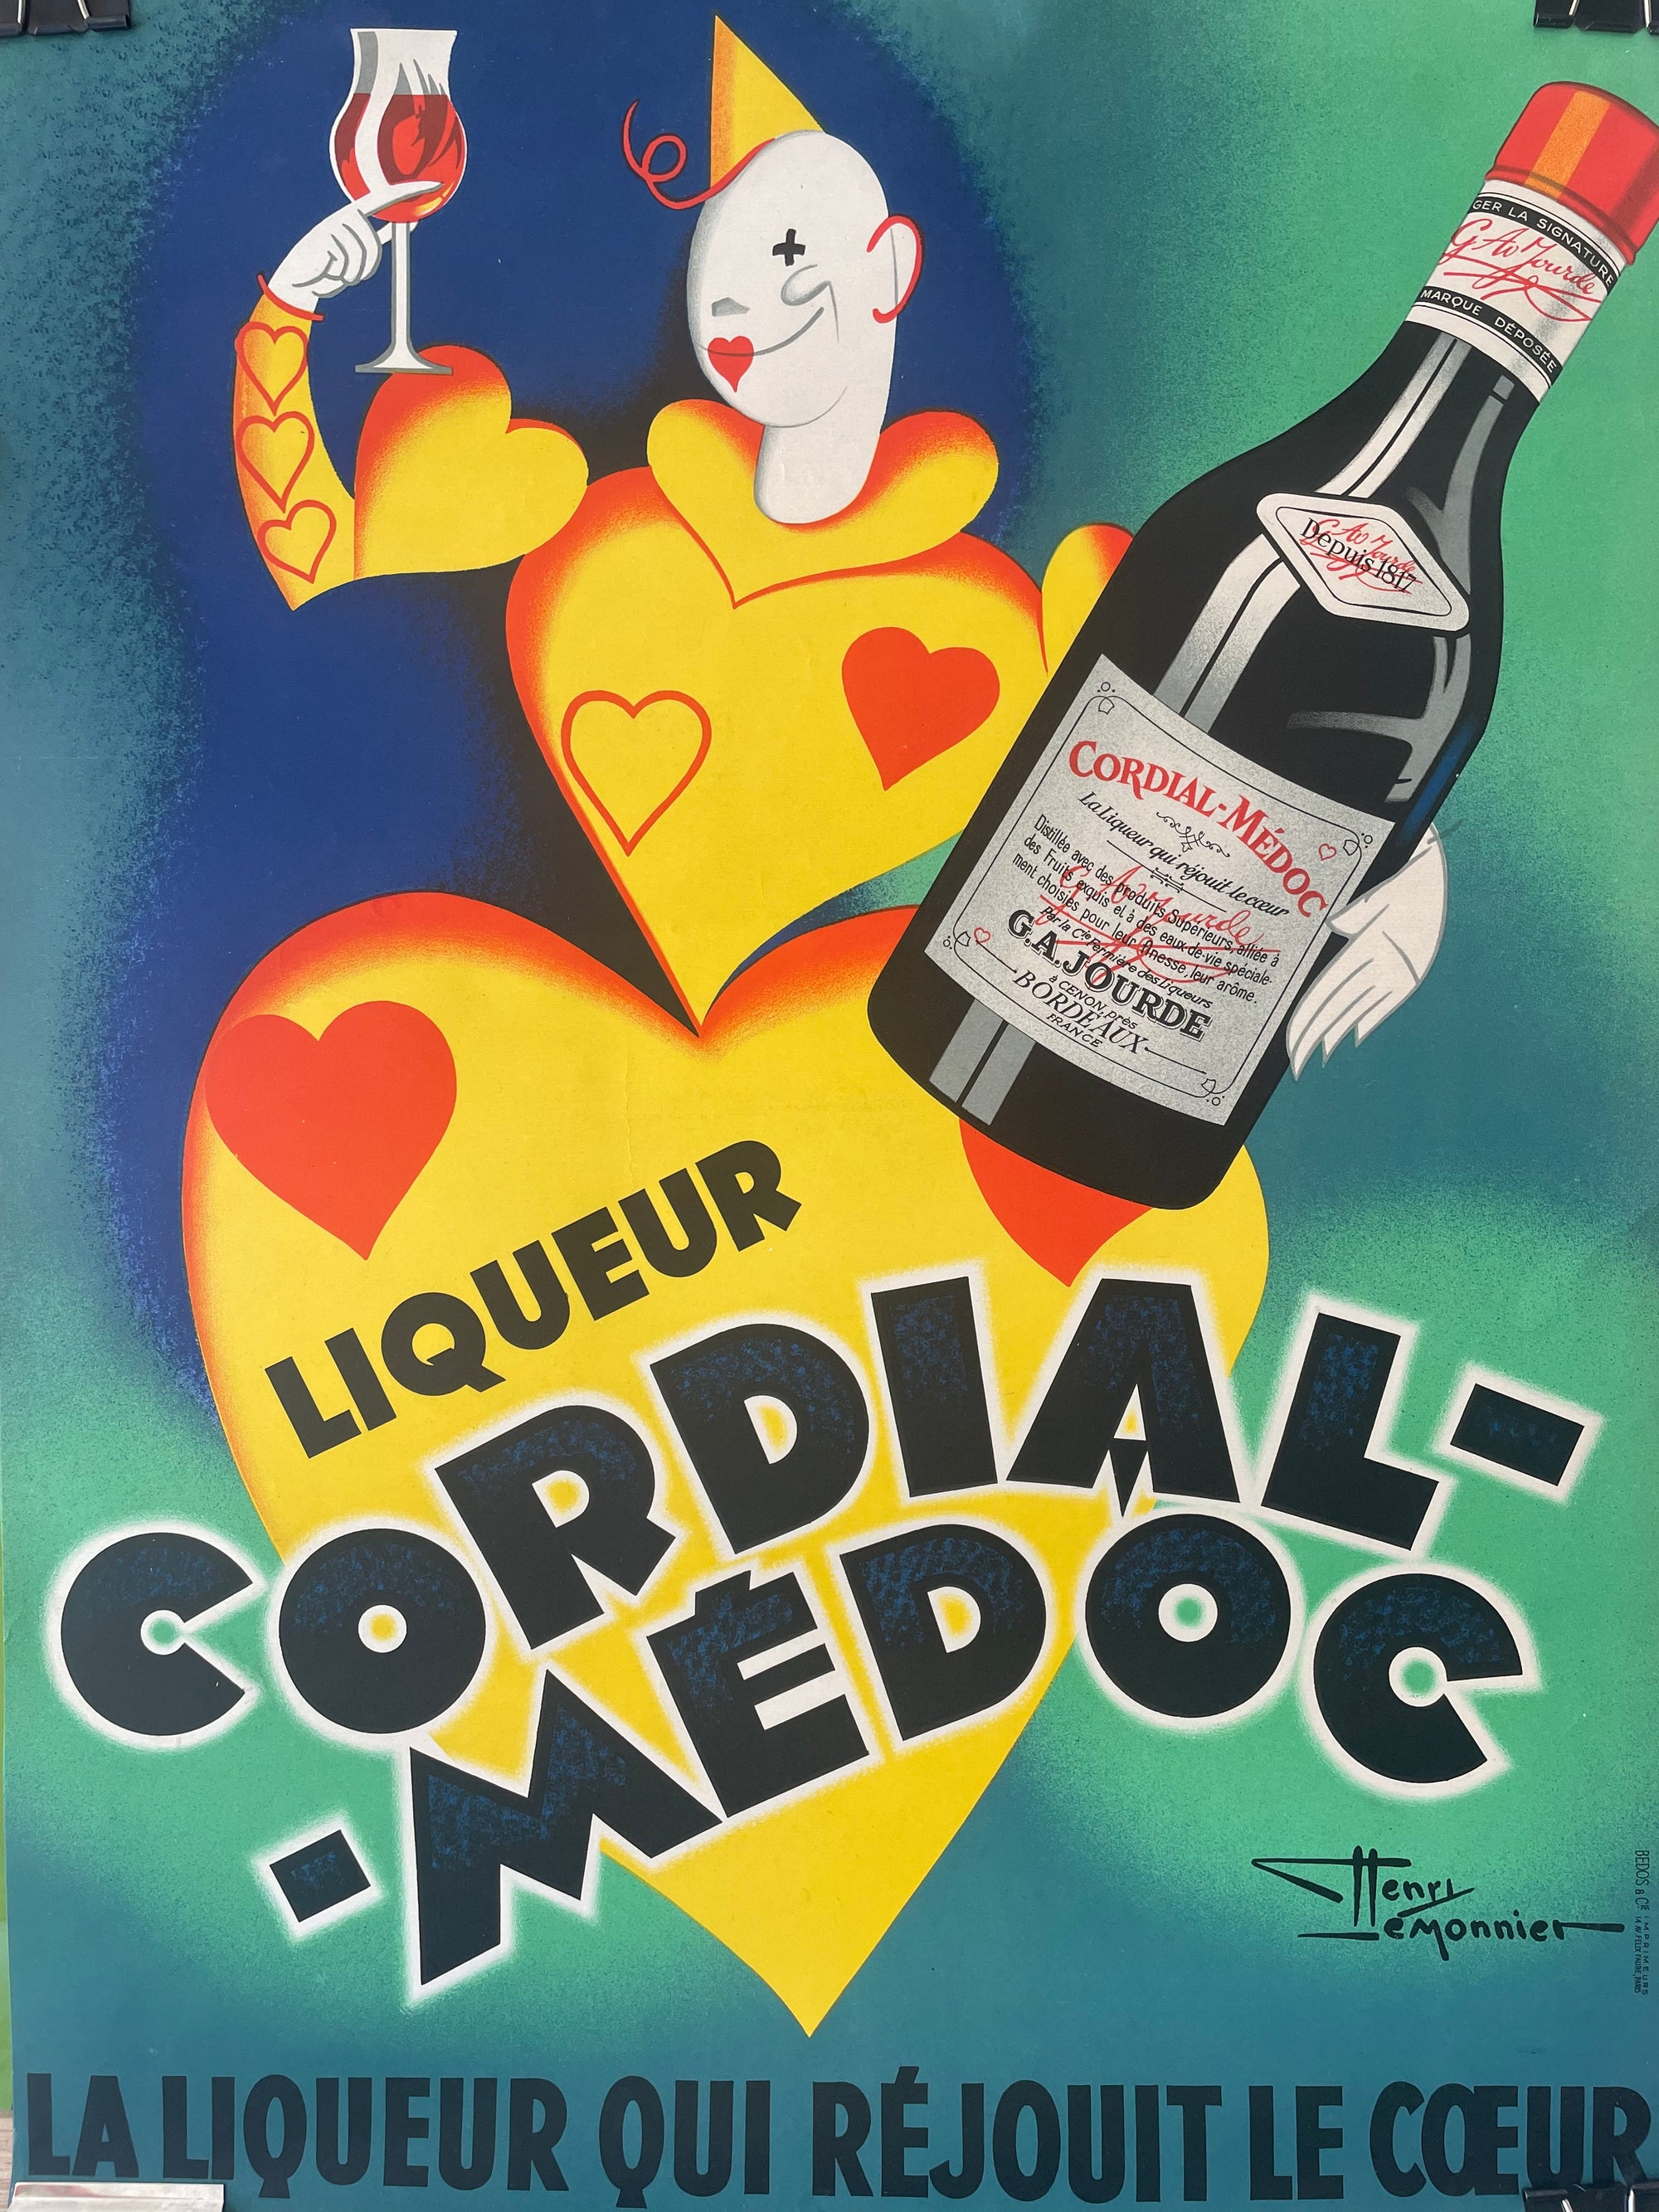 Liqueur Cordial Medoc by Emonnier SMALL